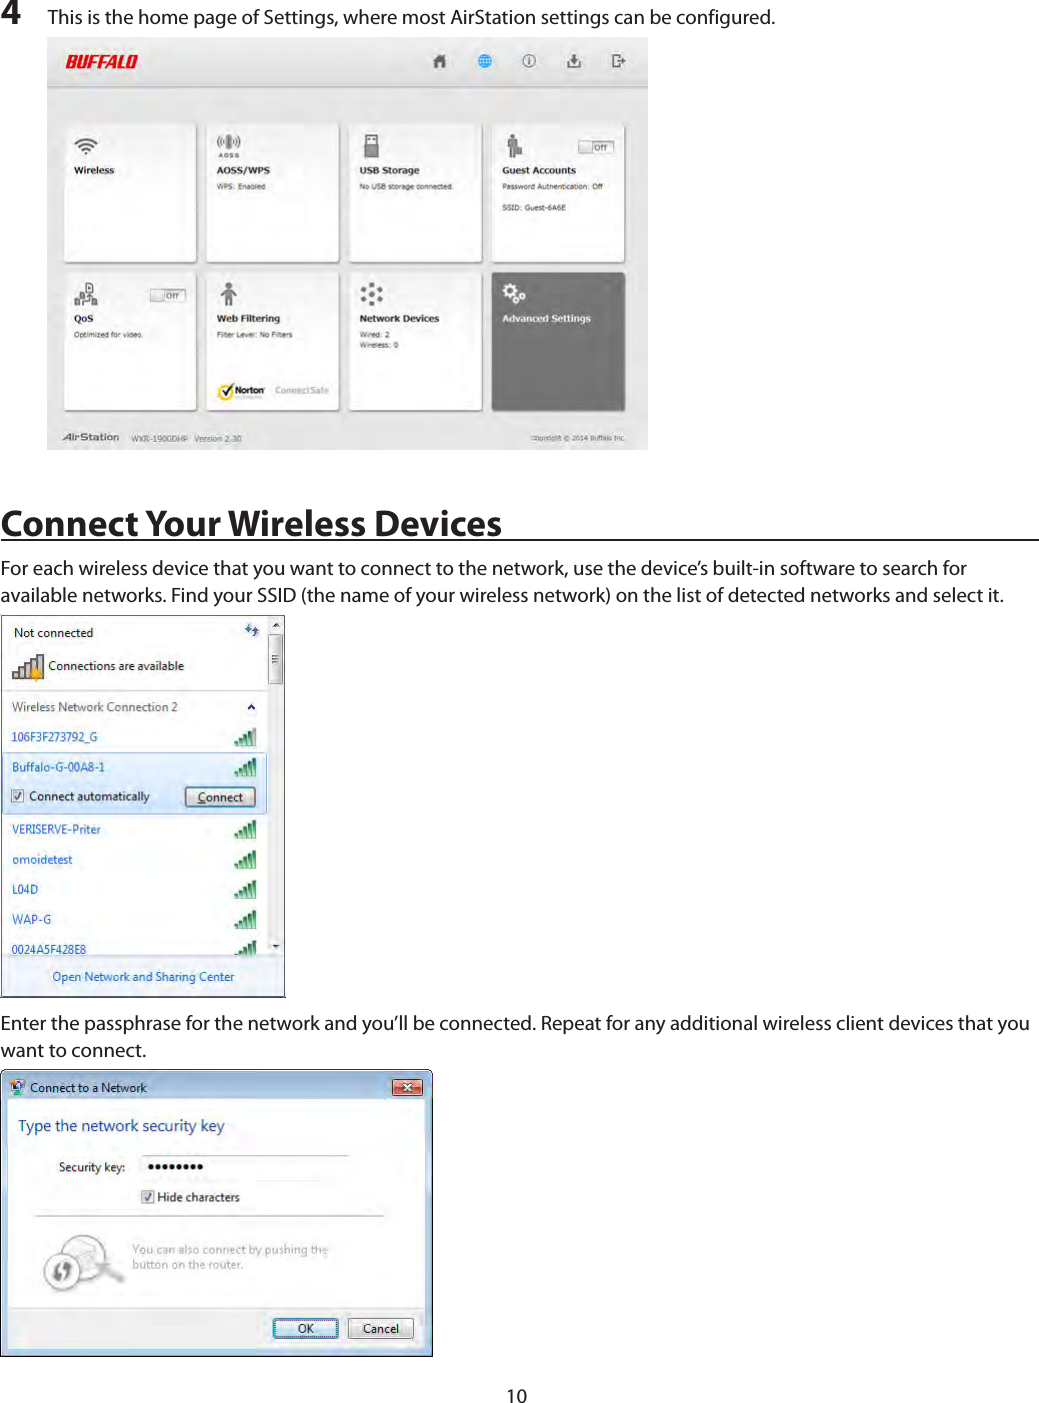 104  This is the home page of Settings, where most AirStation settings can be configured.Connect Your Wireless DevicesFor each wireless device that you want to connect to the network, use the device’s built-in software to search for available networks. Find your SSID (the name of your wireless network) on the list of detected networks and select it.Enter the passphrase for the network and you’ll be connected. Repeat for any additional wireless client devices that you want to connect.